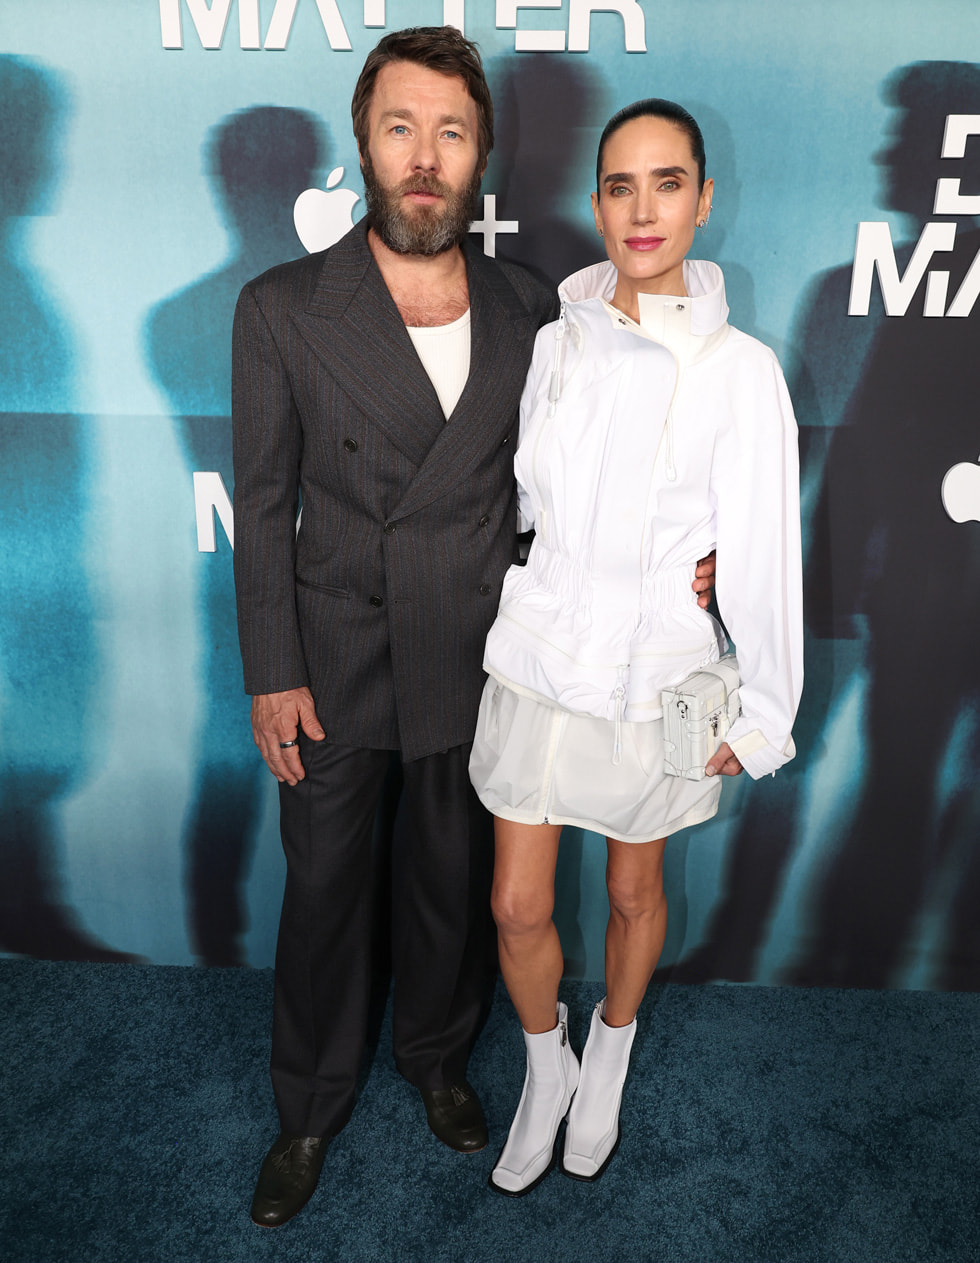 Joel Edgerton and Jennifer Connelly attend the world premiere of Apple TV+’s “Dark Matter” at the Hammer Museum on April 29, 2024 in Los Angeles, California. “Dark Matter” debuts globally on Apple TV+ on Wednesday, May 8, 2024.